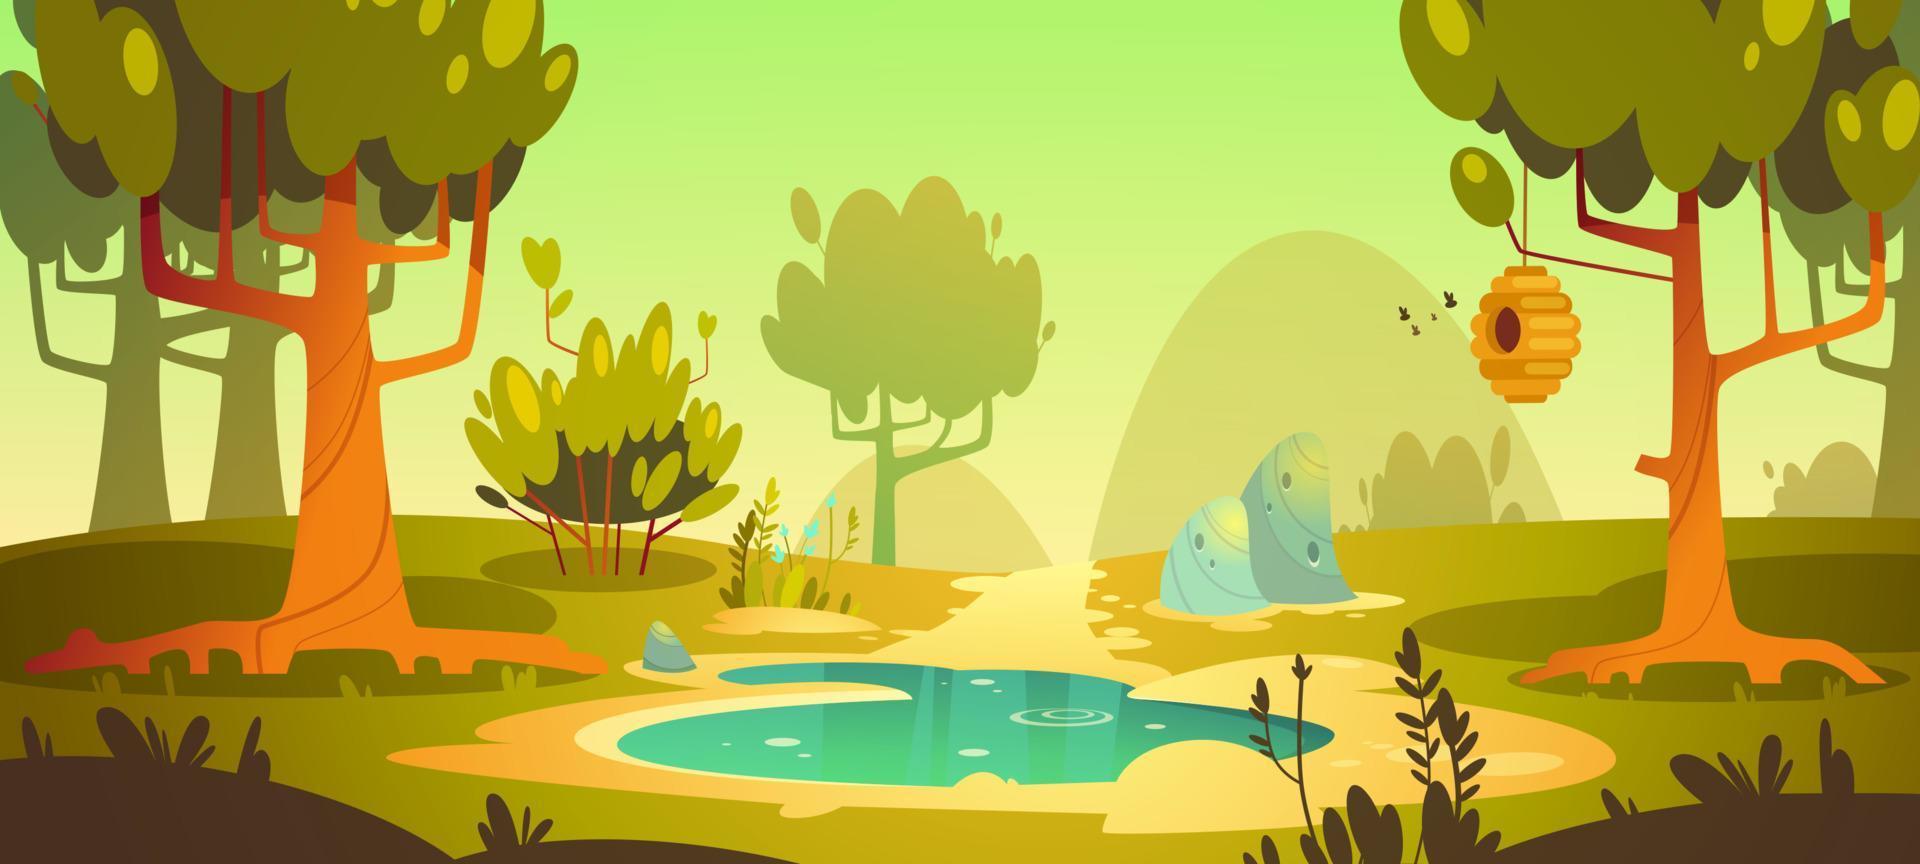 Cartoon forest background with pond, swamp, trail vector